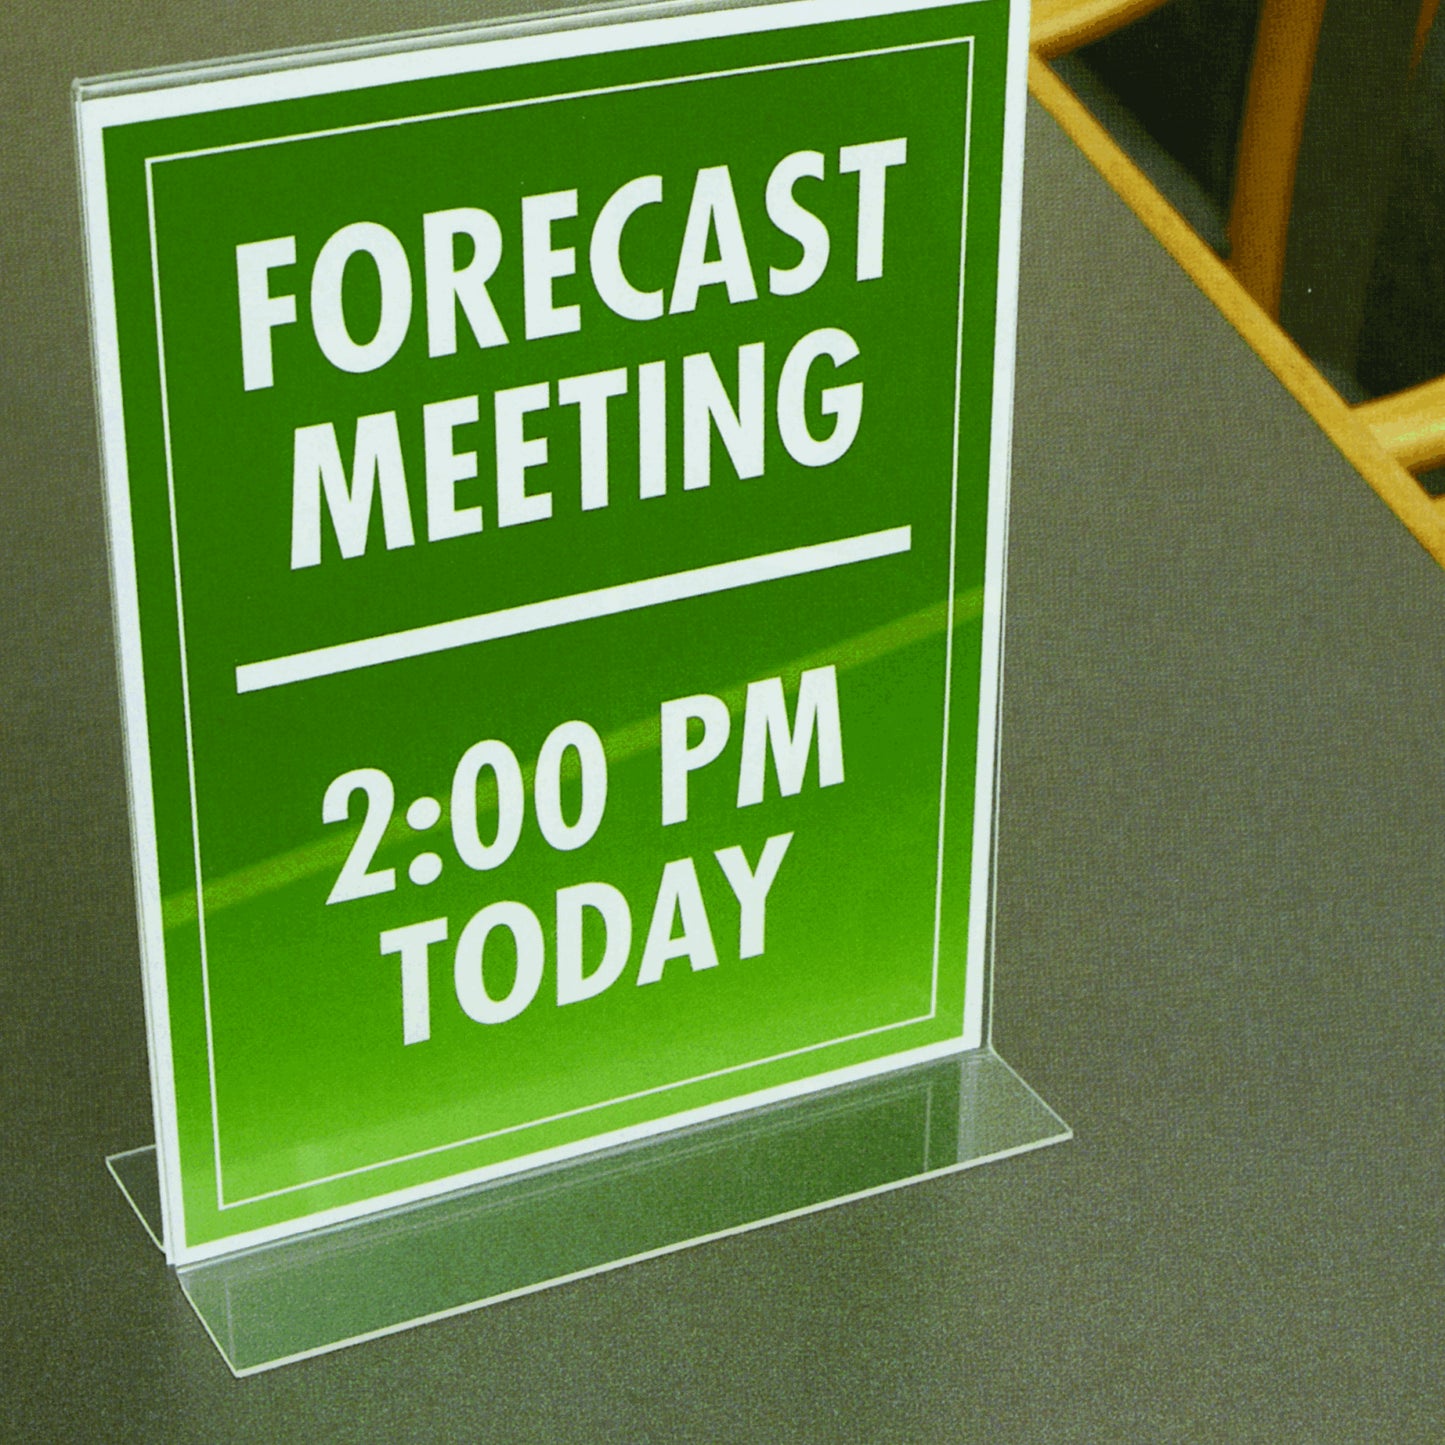 Table Top  Double Sided T-Base Freestanding Sign Display Frame, 5" x 7"